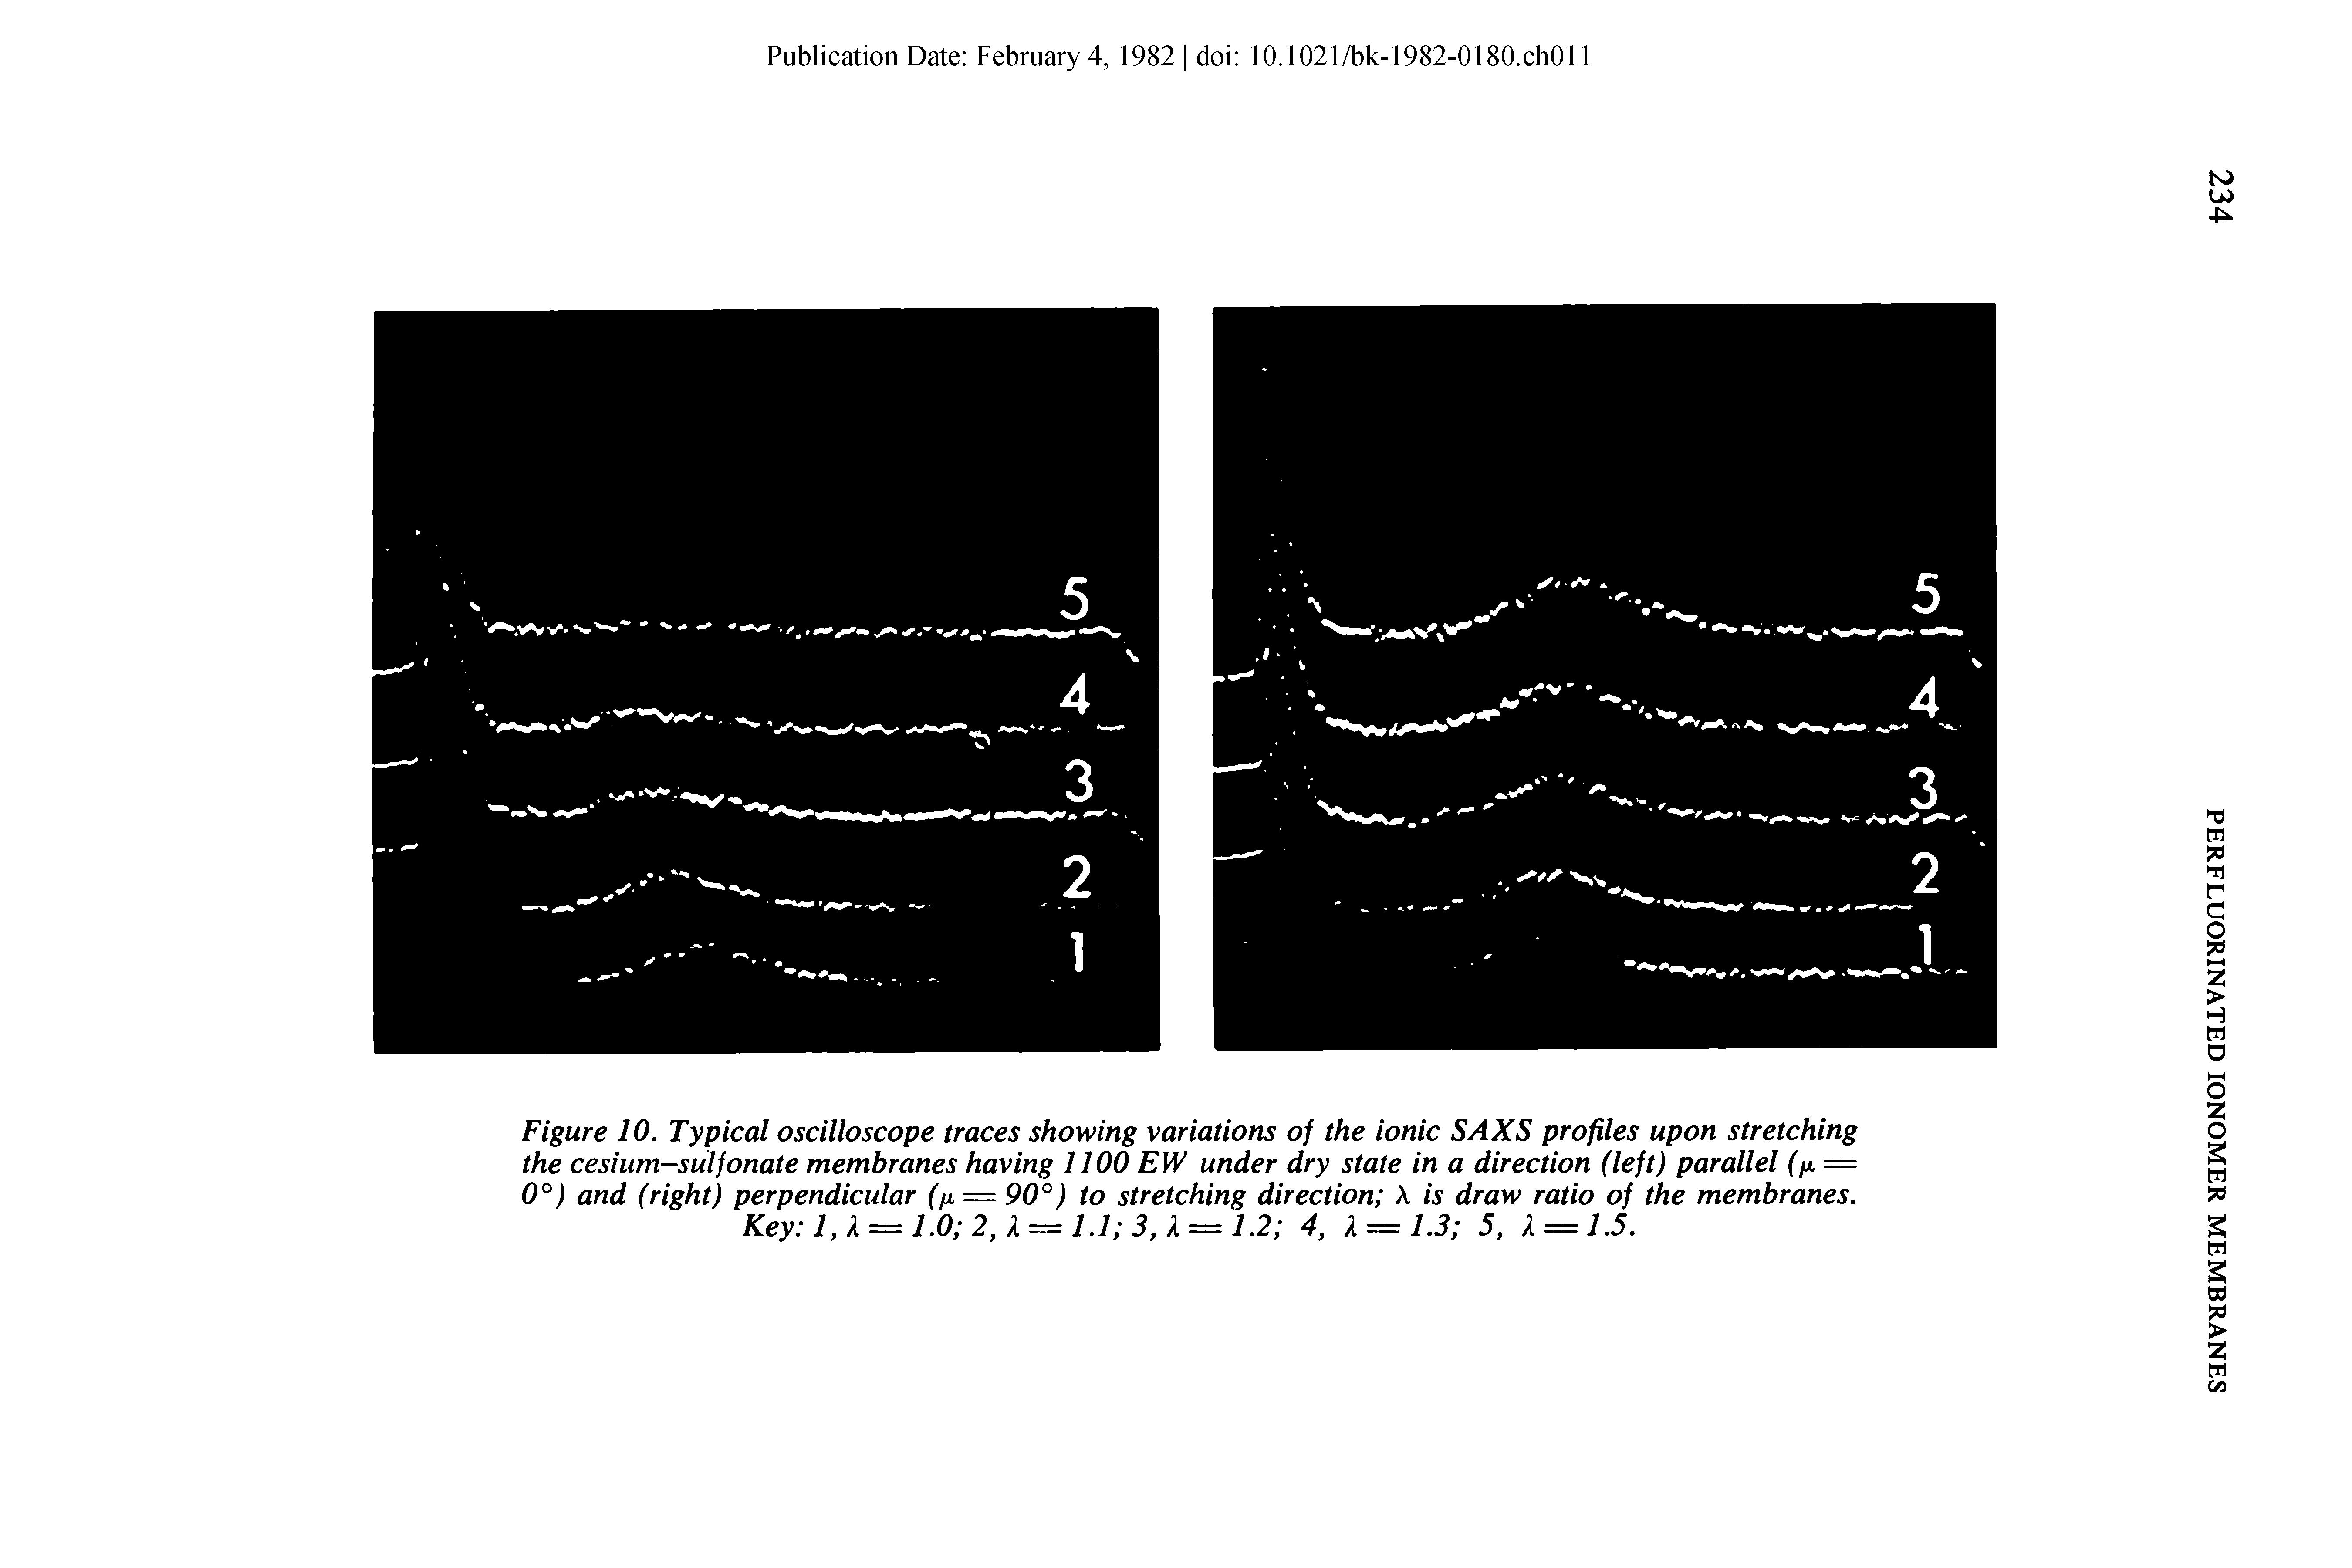 Figure 10. Typical oscilloscope traces showing variations of the ionic SAXS profiles upon stretching the cesium-sulfonate membranes having 1100 EW under dry state in a direction (left) parallel (n = 0°) and (right) perpendicular (V = 90°) to stretching direction X is draw ratio of the membranes. Key 1, X = 1.0 2,1 — 1.1 3, X = 1.2 4, X = 1.3 5, X = 1.5.